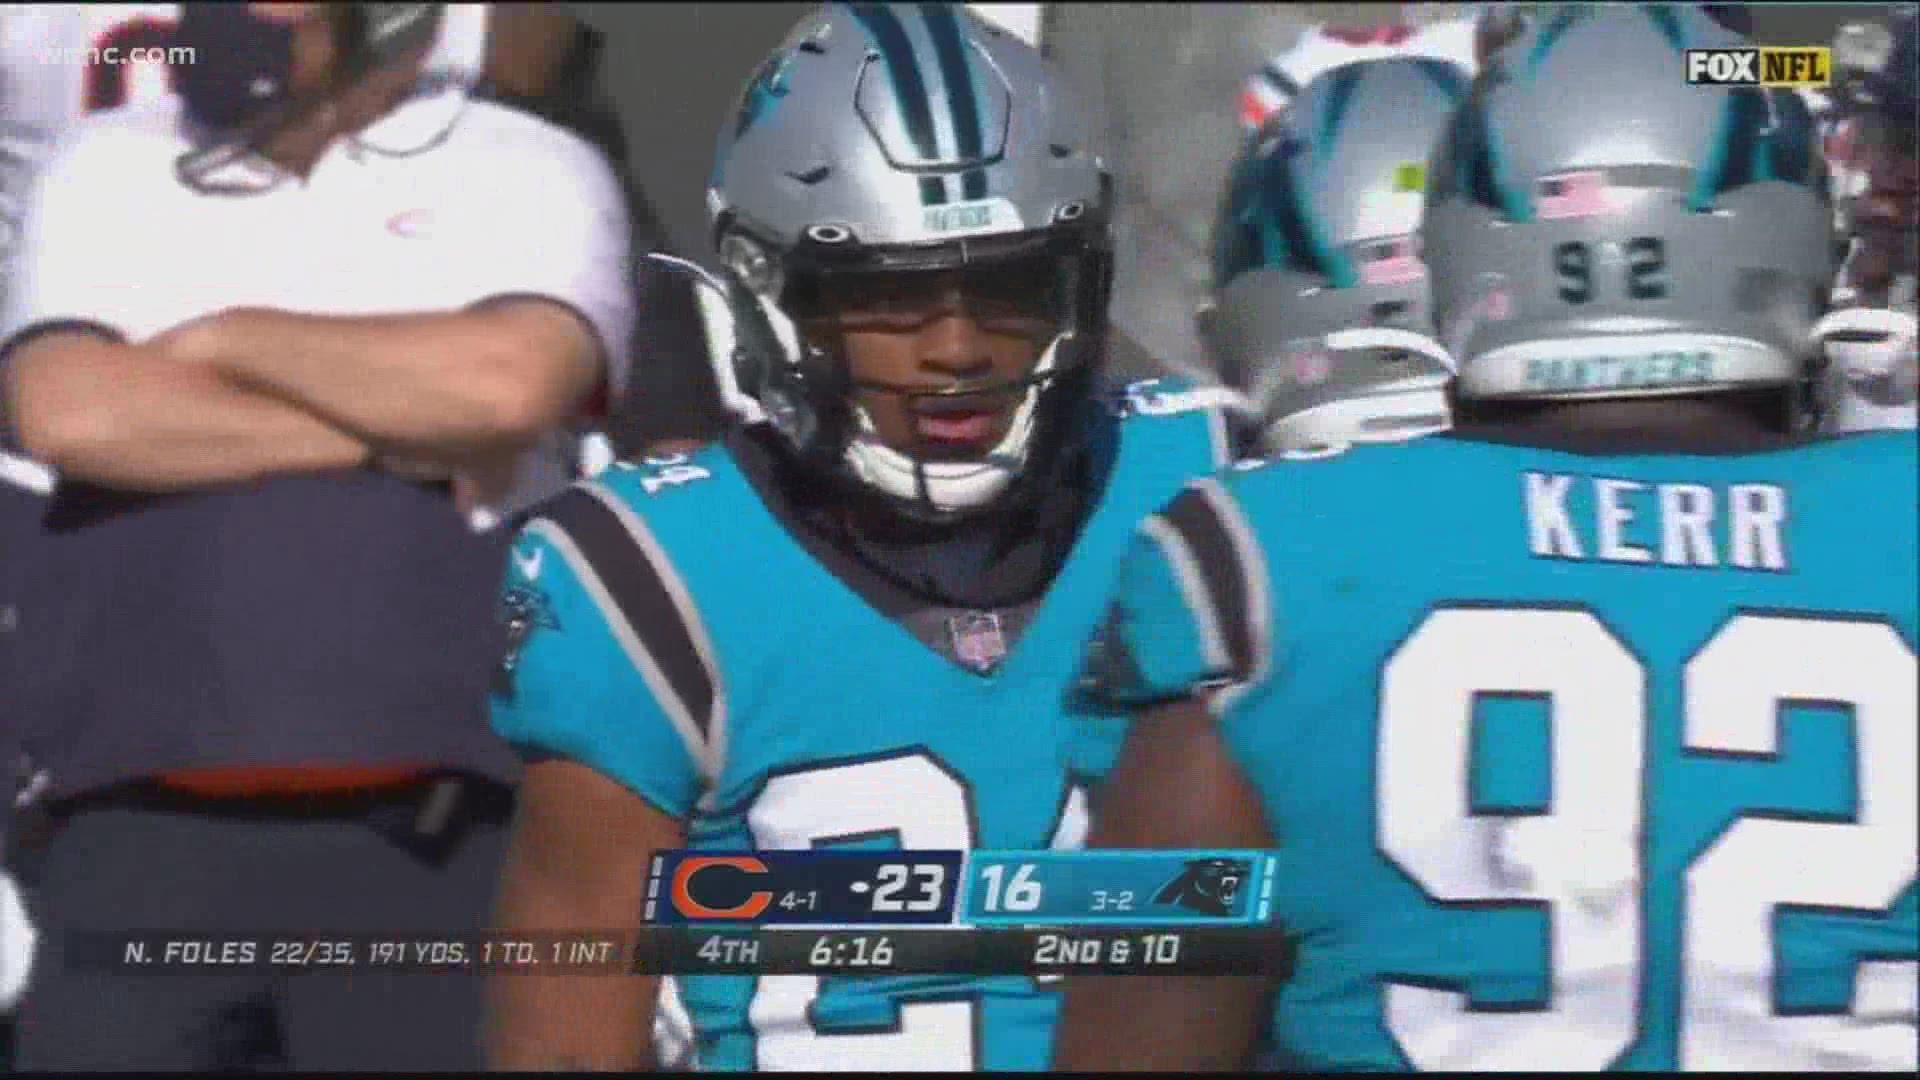 The Carolina Panthers lost to the Chicago Bears at Bank of America Stadium in Charlotte Sunday, breaking the Panthers' three-game winning streak. FINAL SCORE: 23-16.